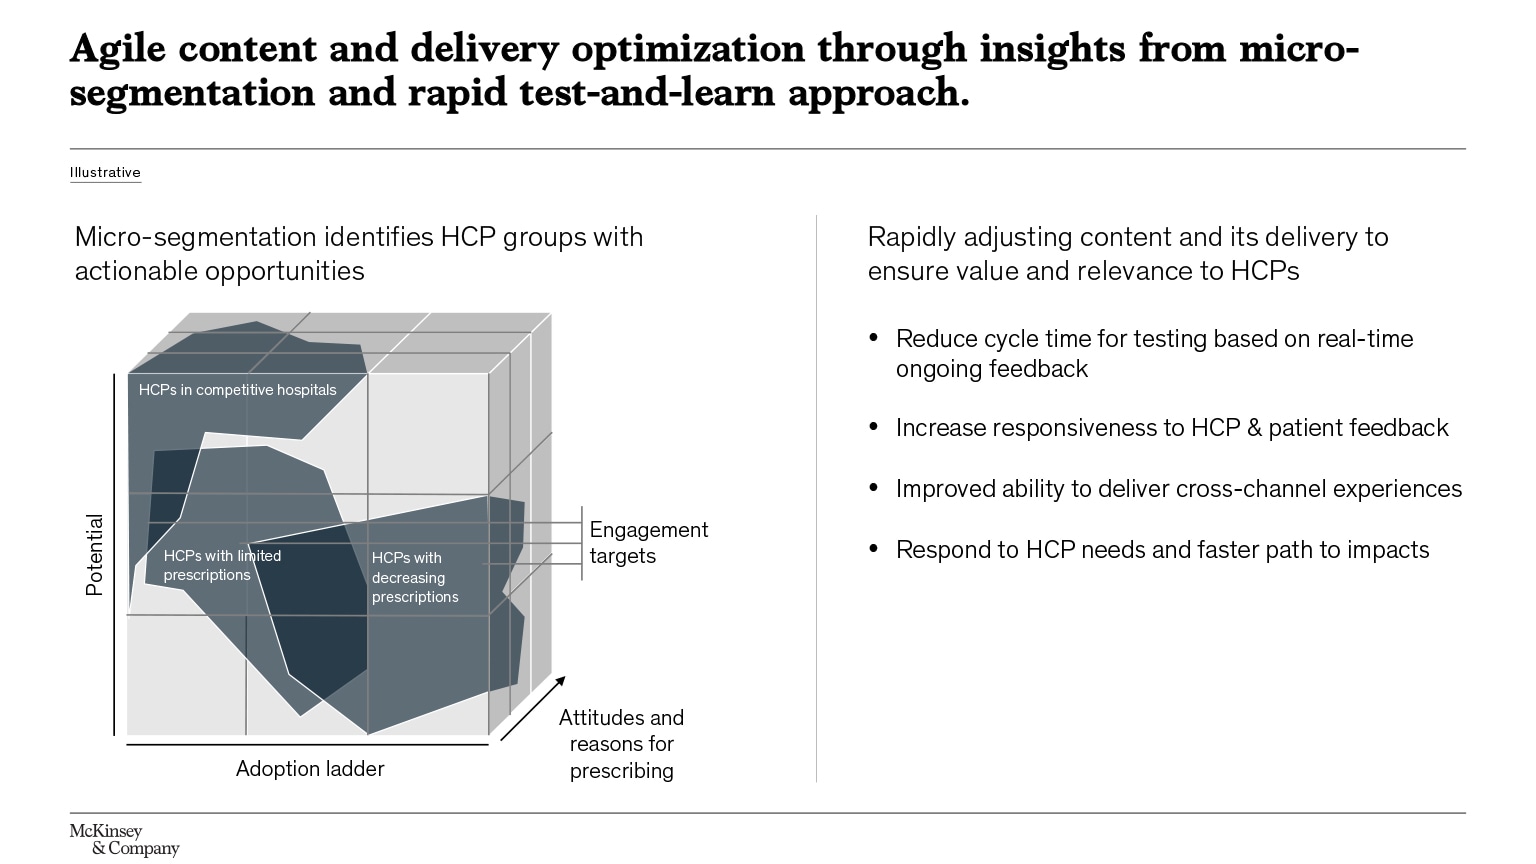 Agile content and delivery optimization—content personalization at the HCP level, building on insights from HCP micro-segmentation and predictive modeling